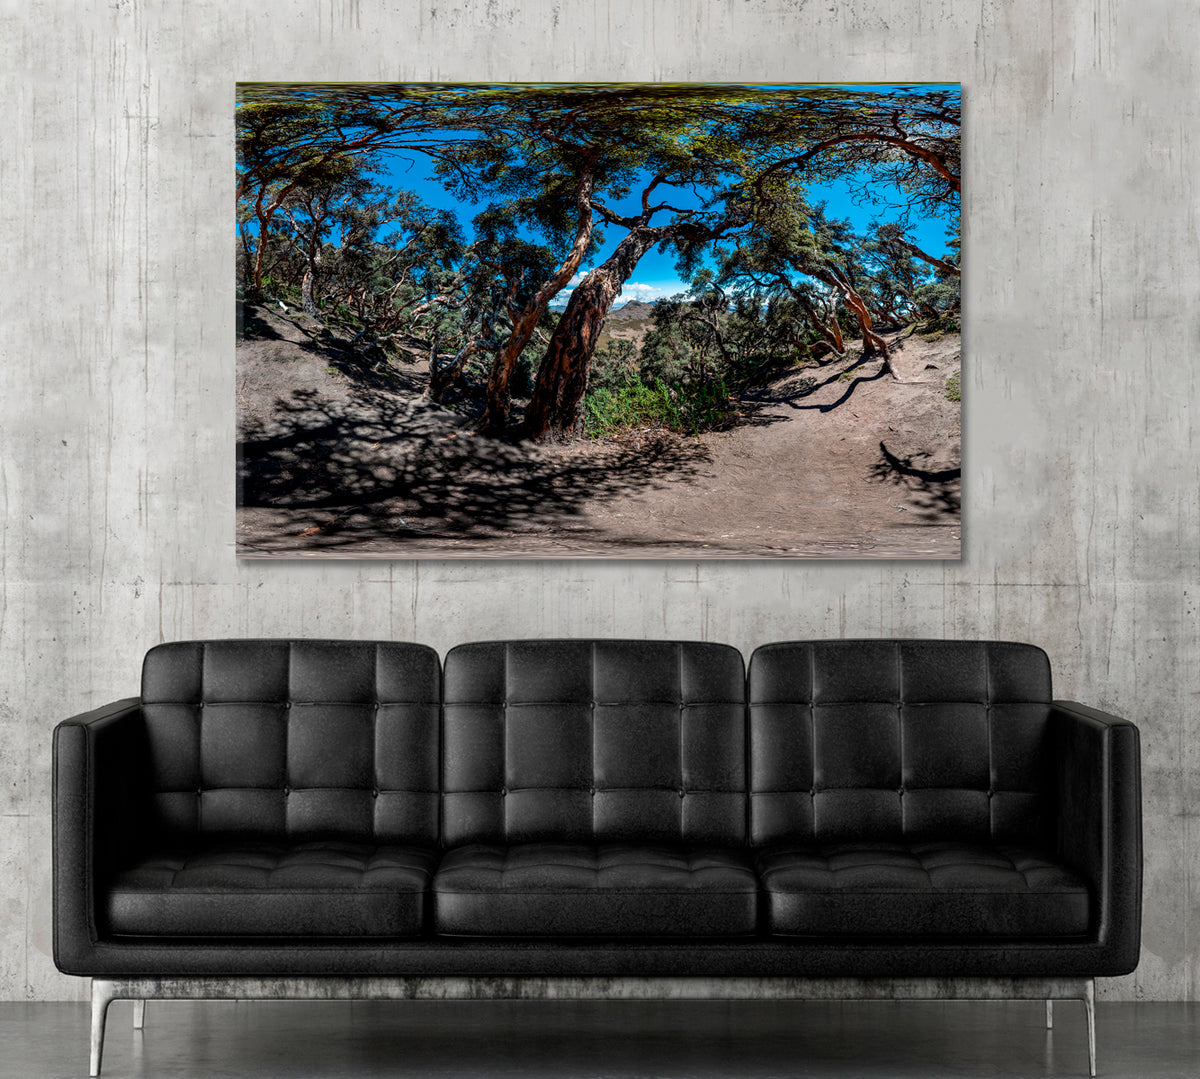 Ecuador Polylepis Forest Thousand Year Old Trees Poster Nature Wall Canvas Print Artesty 1 panel 24" x 16" 